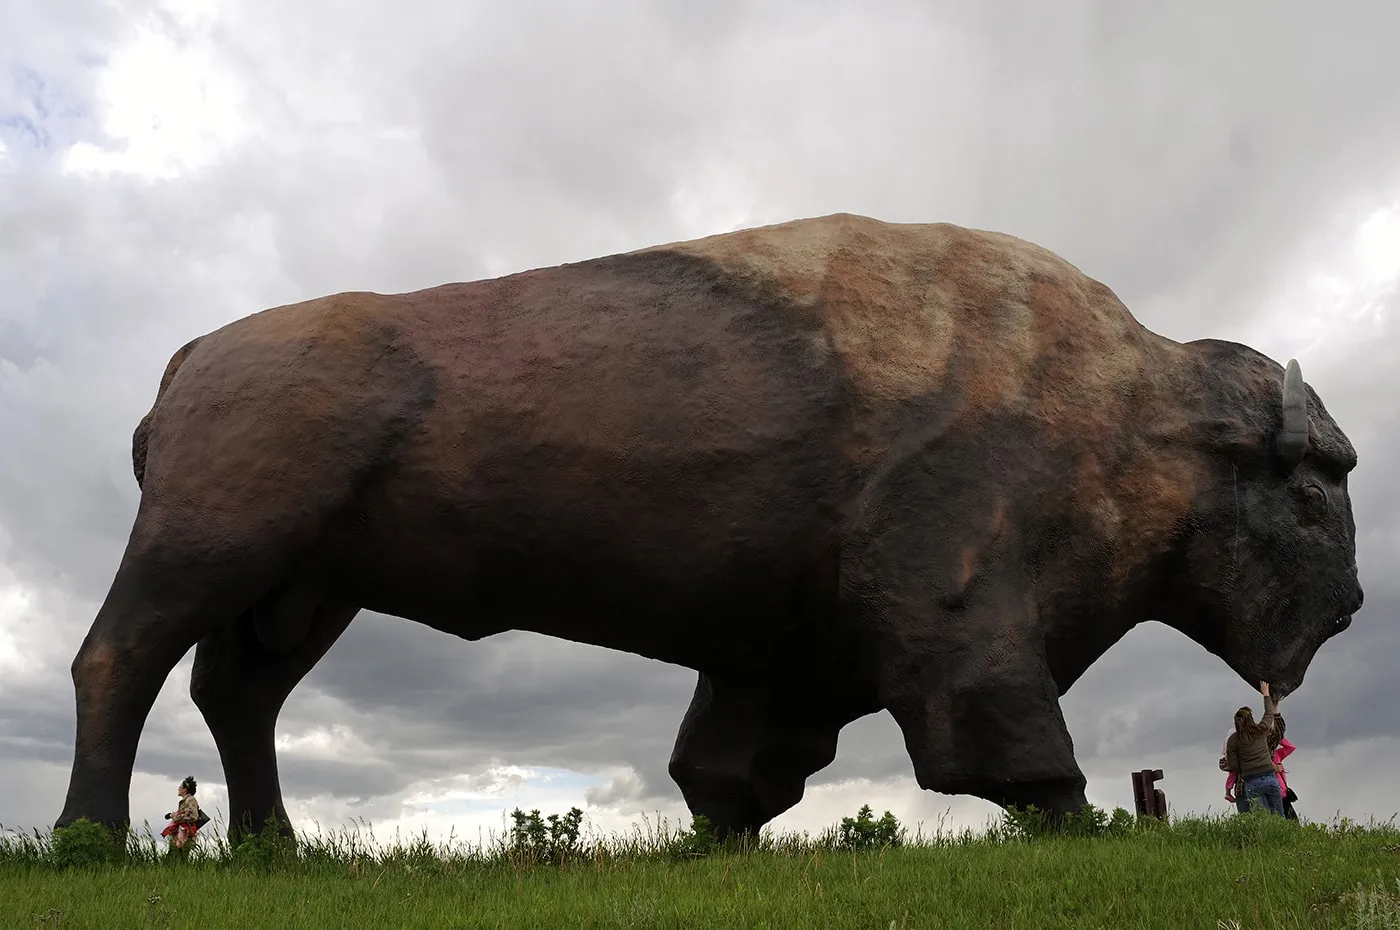 The World's Largest Buffalo, Jamestown, ND.  One of the sites featured in the feature documentary World's Largest. www.worldslargestdoc.com